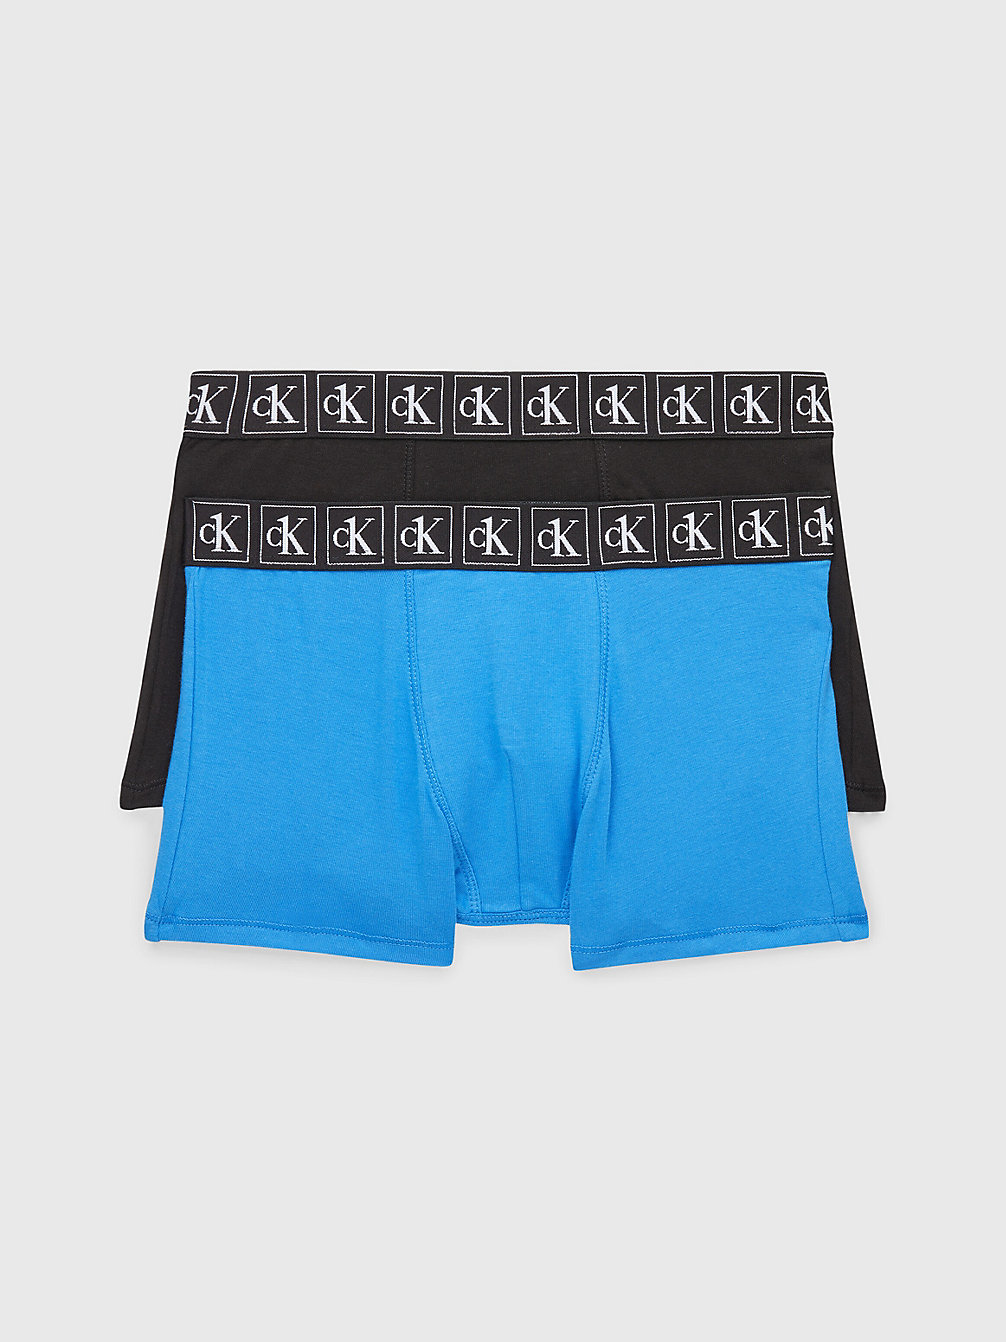 ELECTRICAQUA/PVHBLACK 2 Pack Boys Trunks - CK One undefined boys Calvin Klein